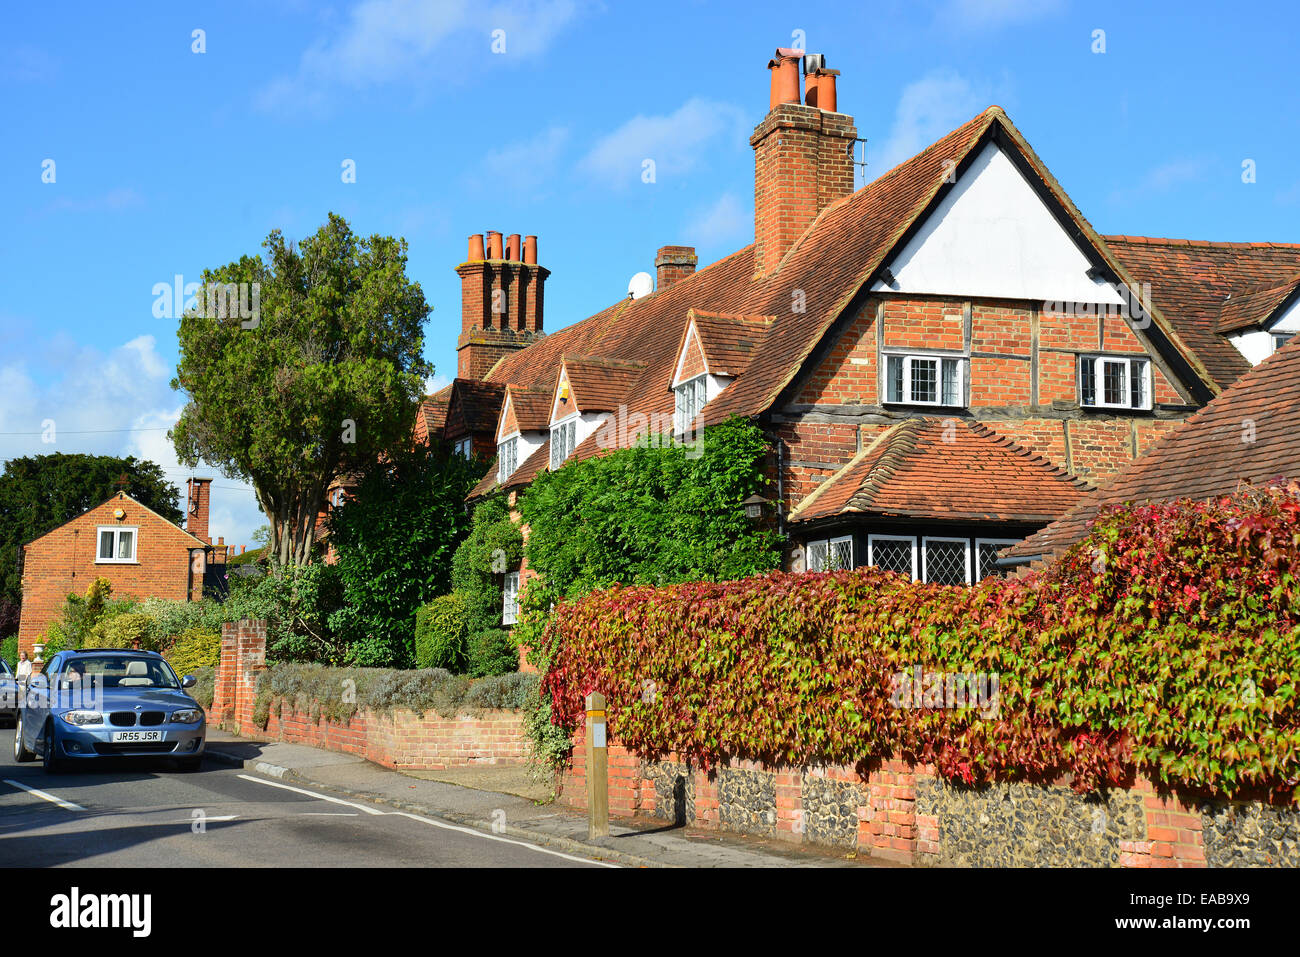 Période cottage, Thames Street, Sonning-On-Thames, Berkshire, Angleterre, Royaume-Uni Banque D'Images